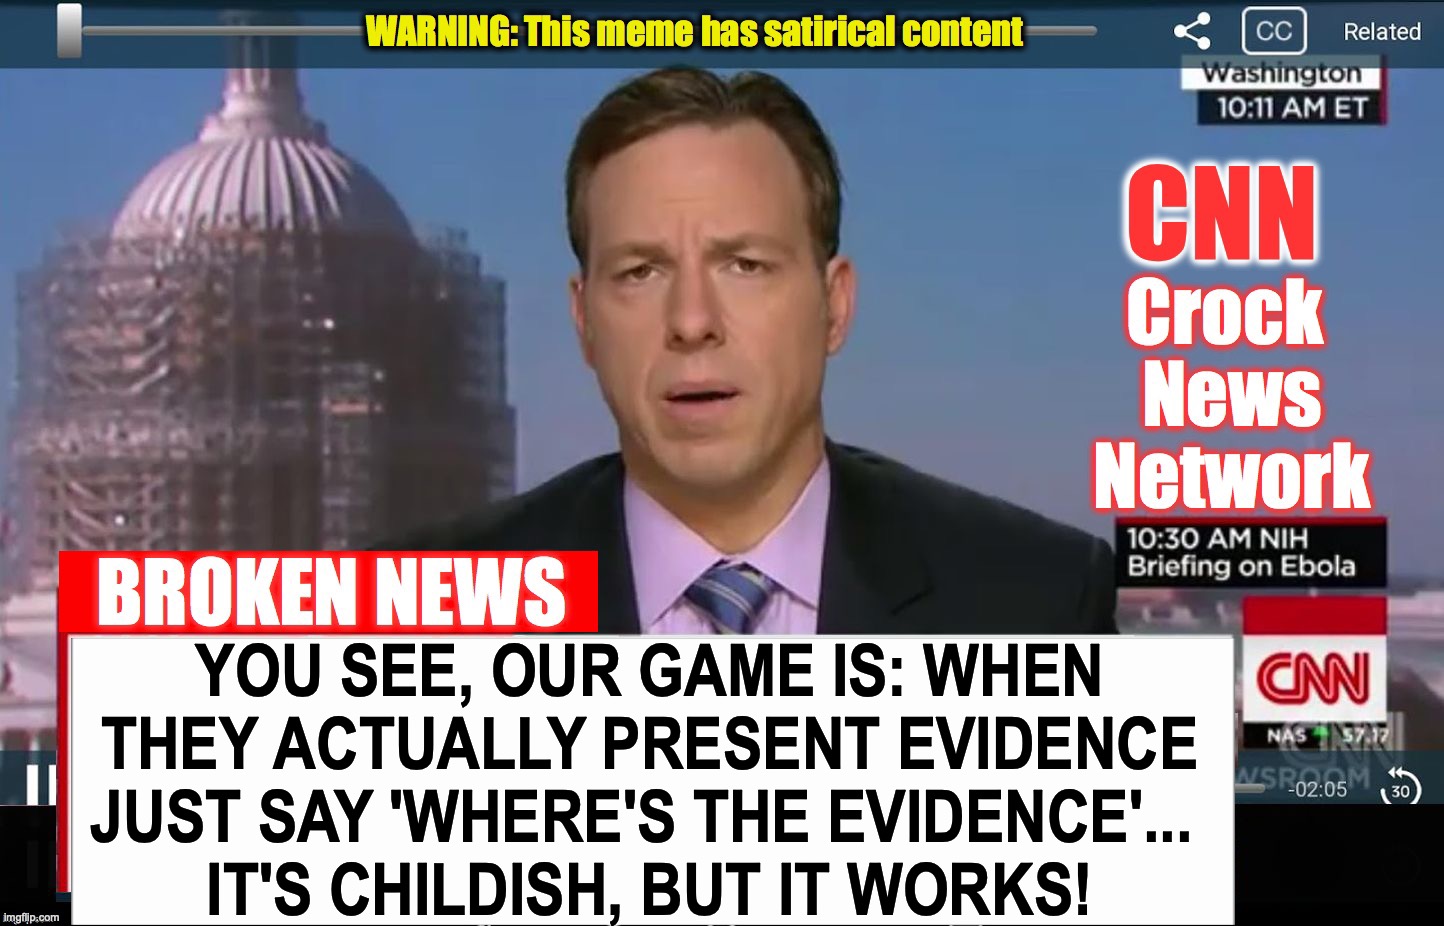 CNN Crock News Network | YOU SEE, OUR GAME IS: WHEN THEY ACTUALLY PRESENT EVIDENCE JUST SAY 'WHERE'S THE EVIDENCE'... 
IT'S CHILDISH, BUT IT WORKS! | image tagged in cnn crock news network,evidence,election fraud | made w/ Imgflip meme maker